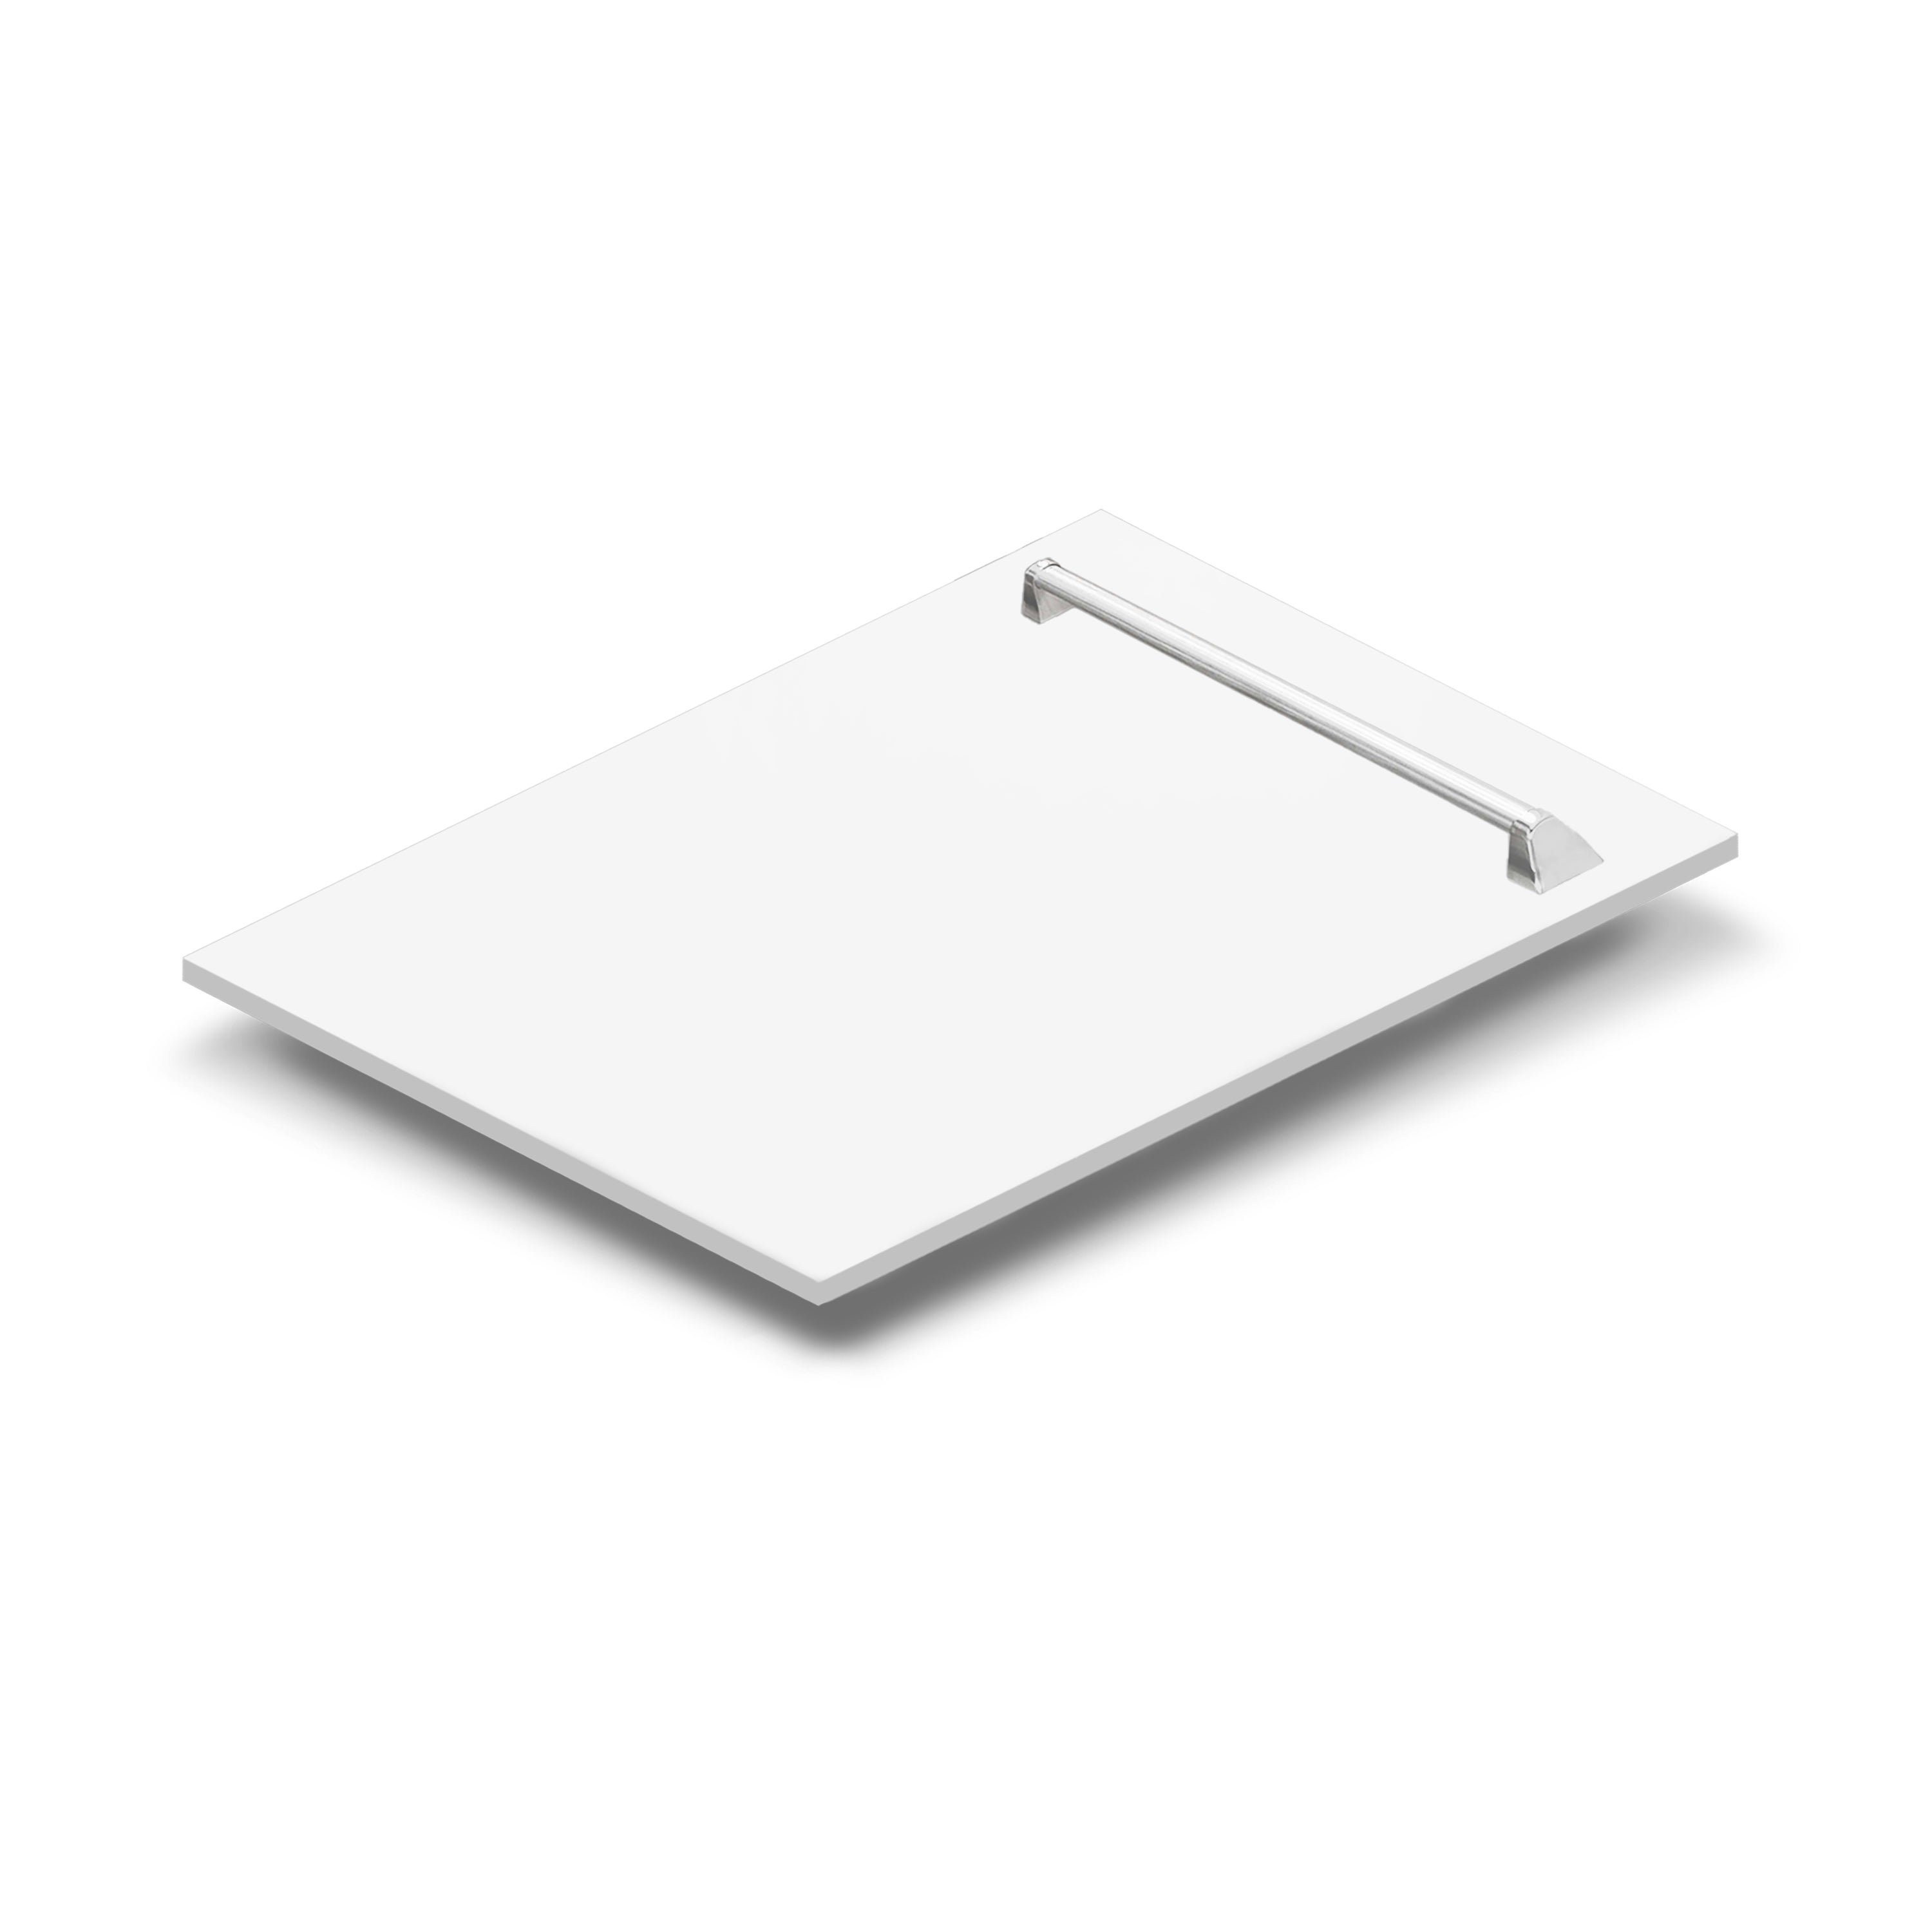 ZLINE 18" Tallac Dishwasher Panel in White Matte with Traditional Handle (DPV-WM-18)